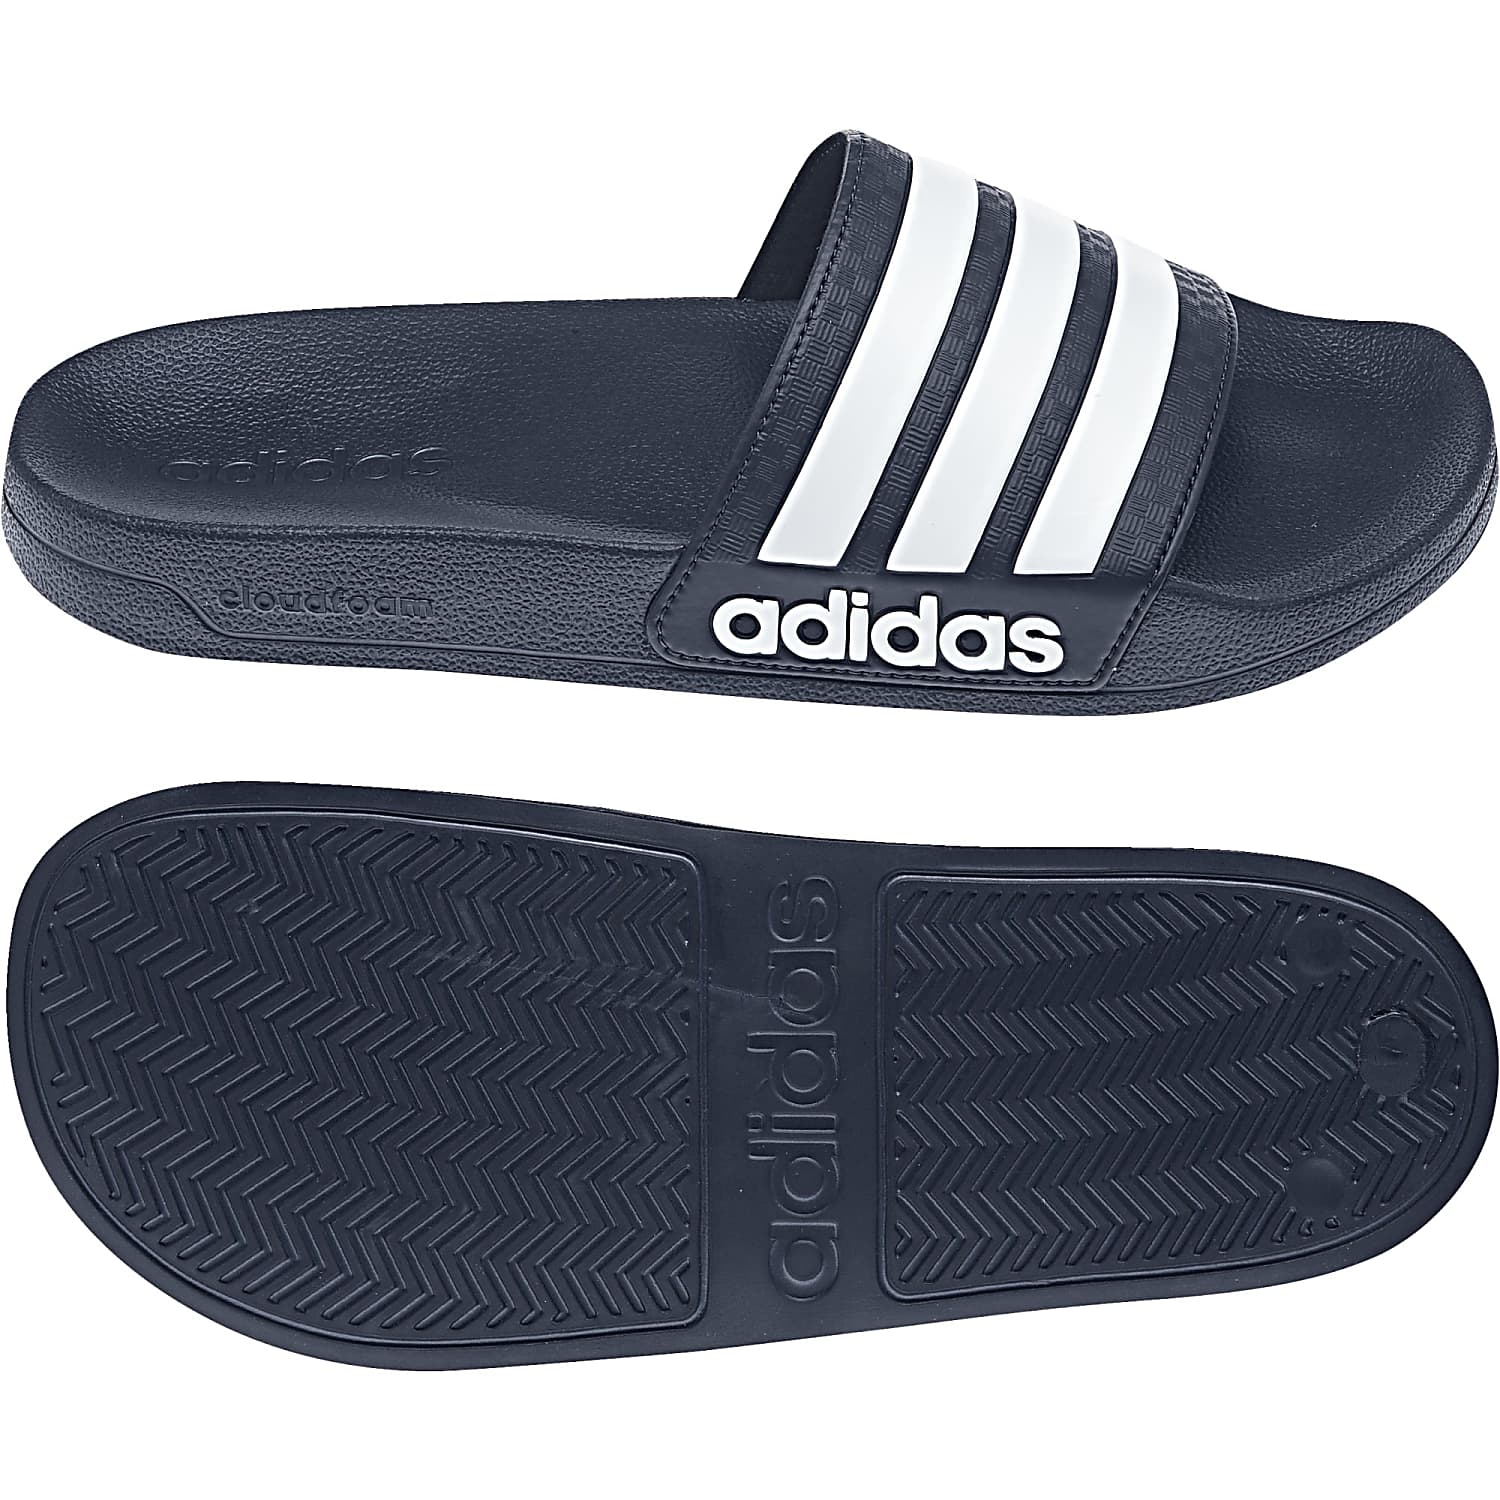 adidas cloud slippers